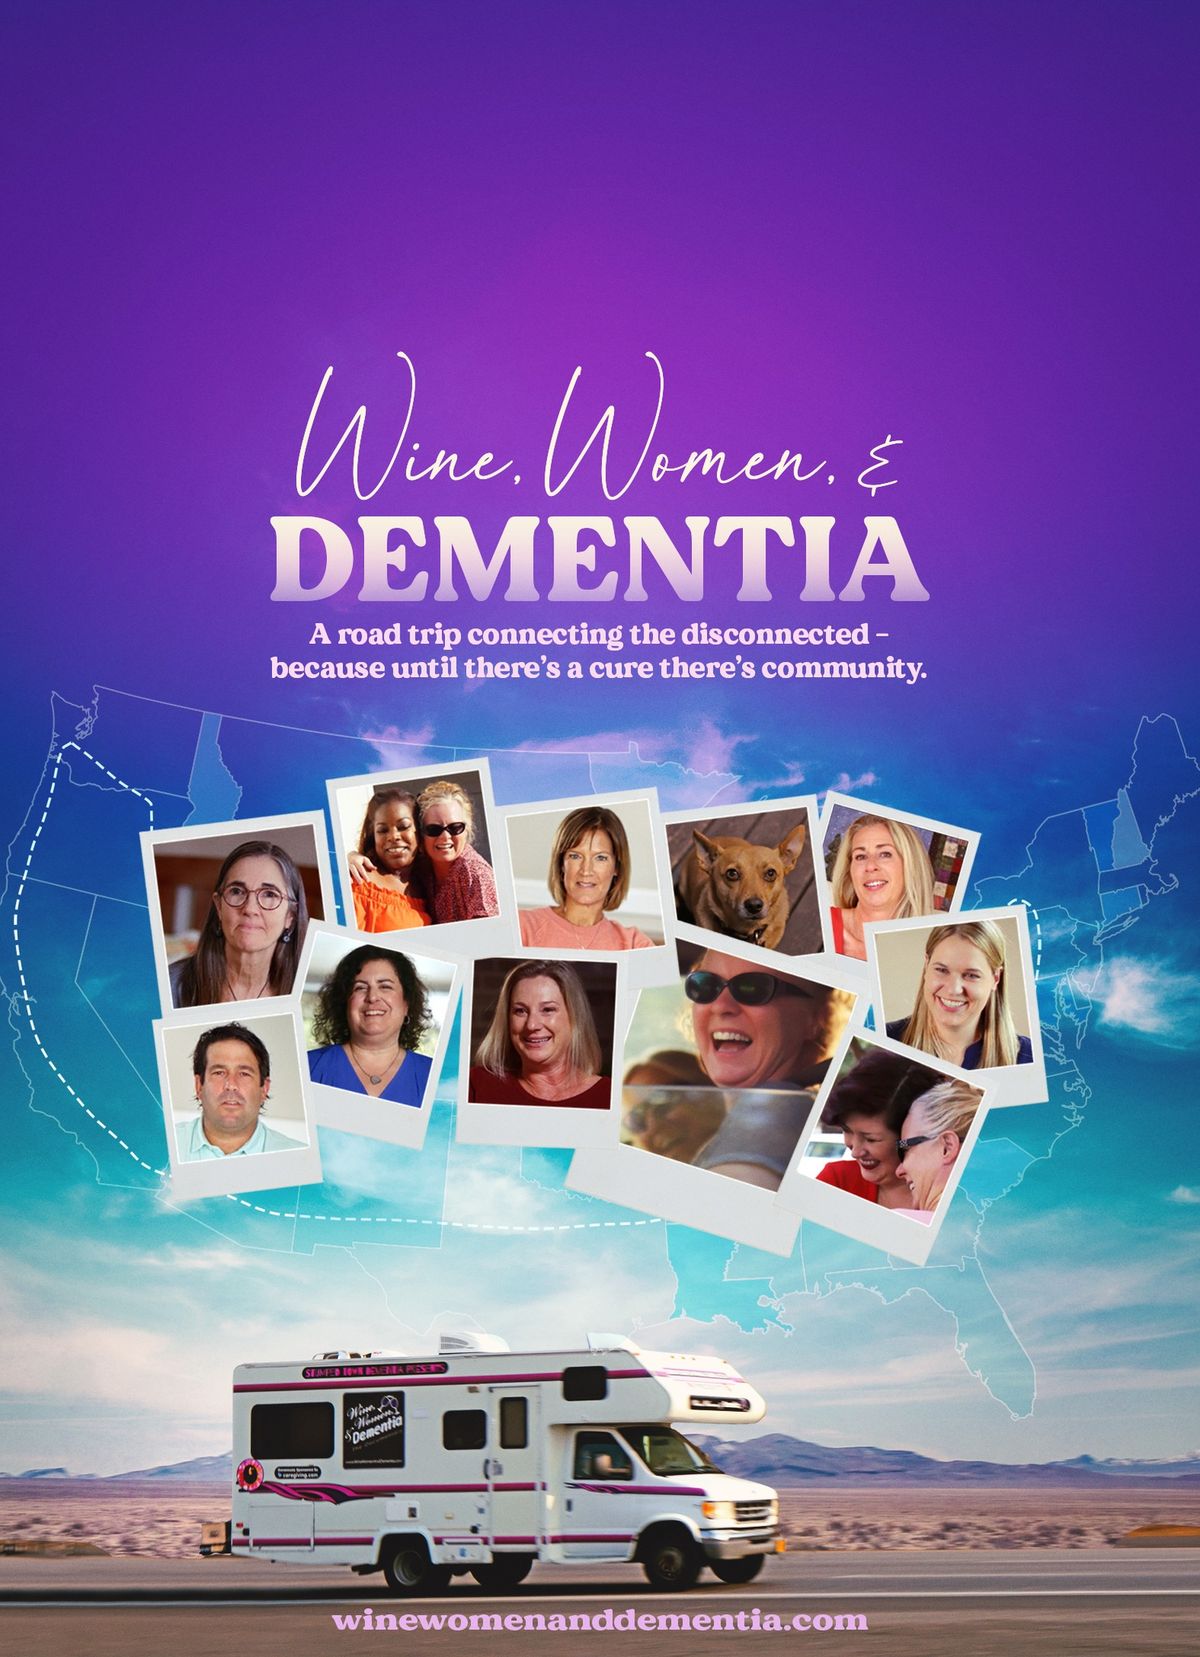 Wine, Women & Dementia- free dinner, wine, documentary, and thoughtful discussion